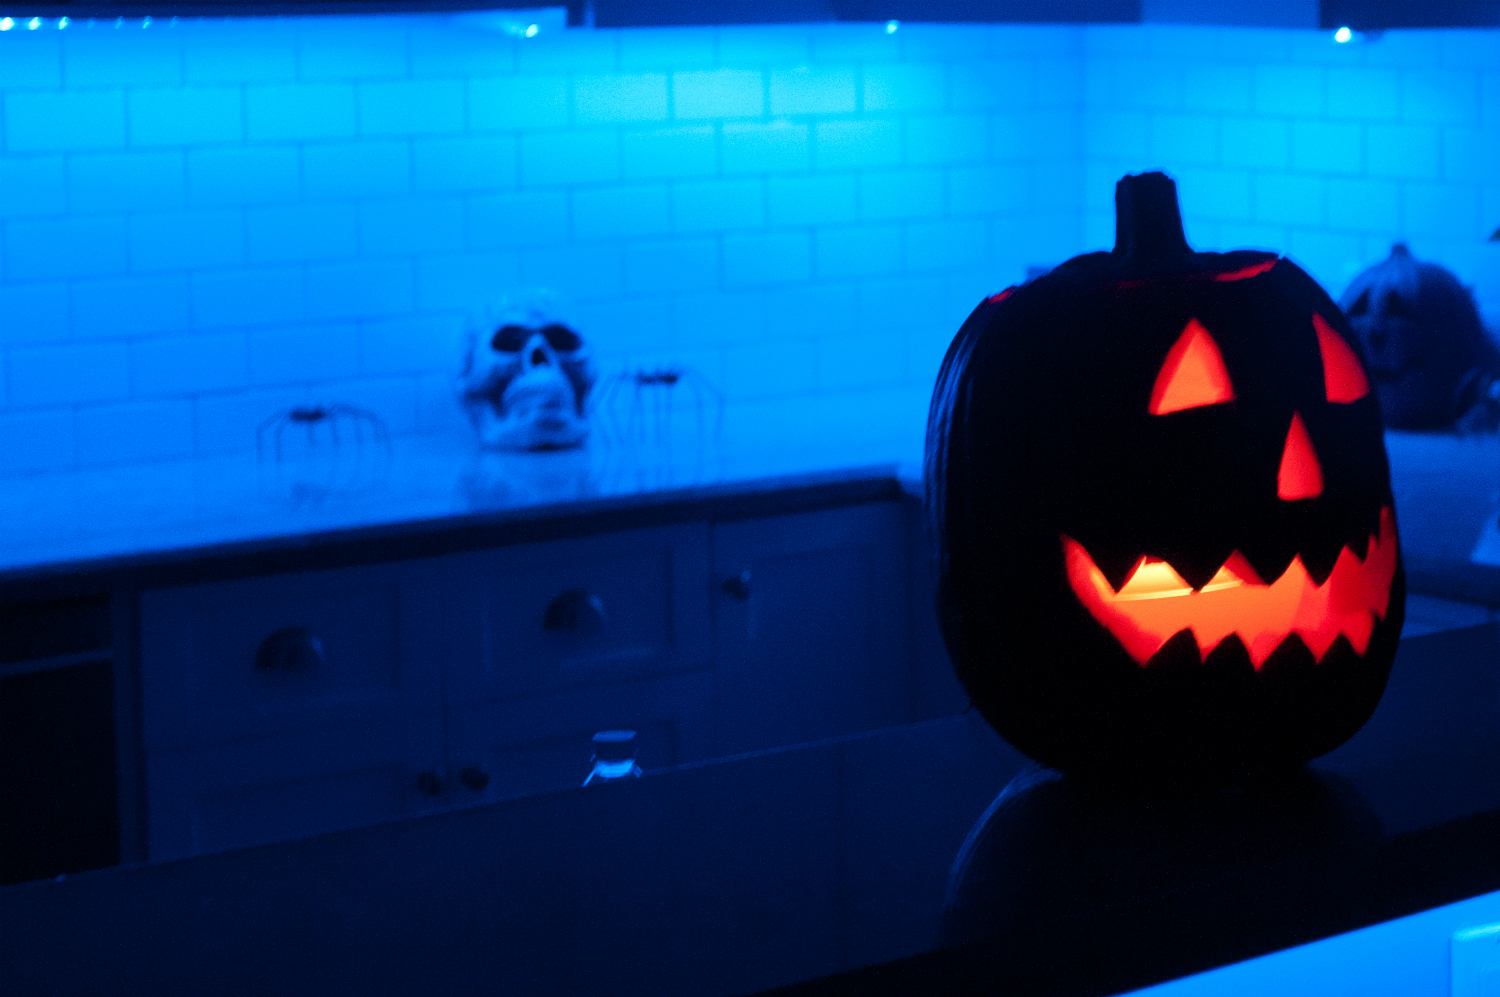 philips hue and sengled get their led lights ready for halloween pumpkin